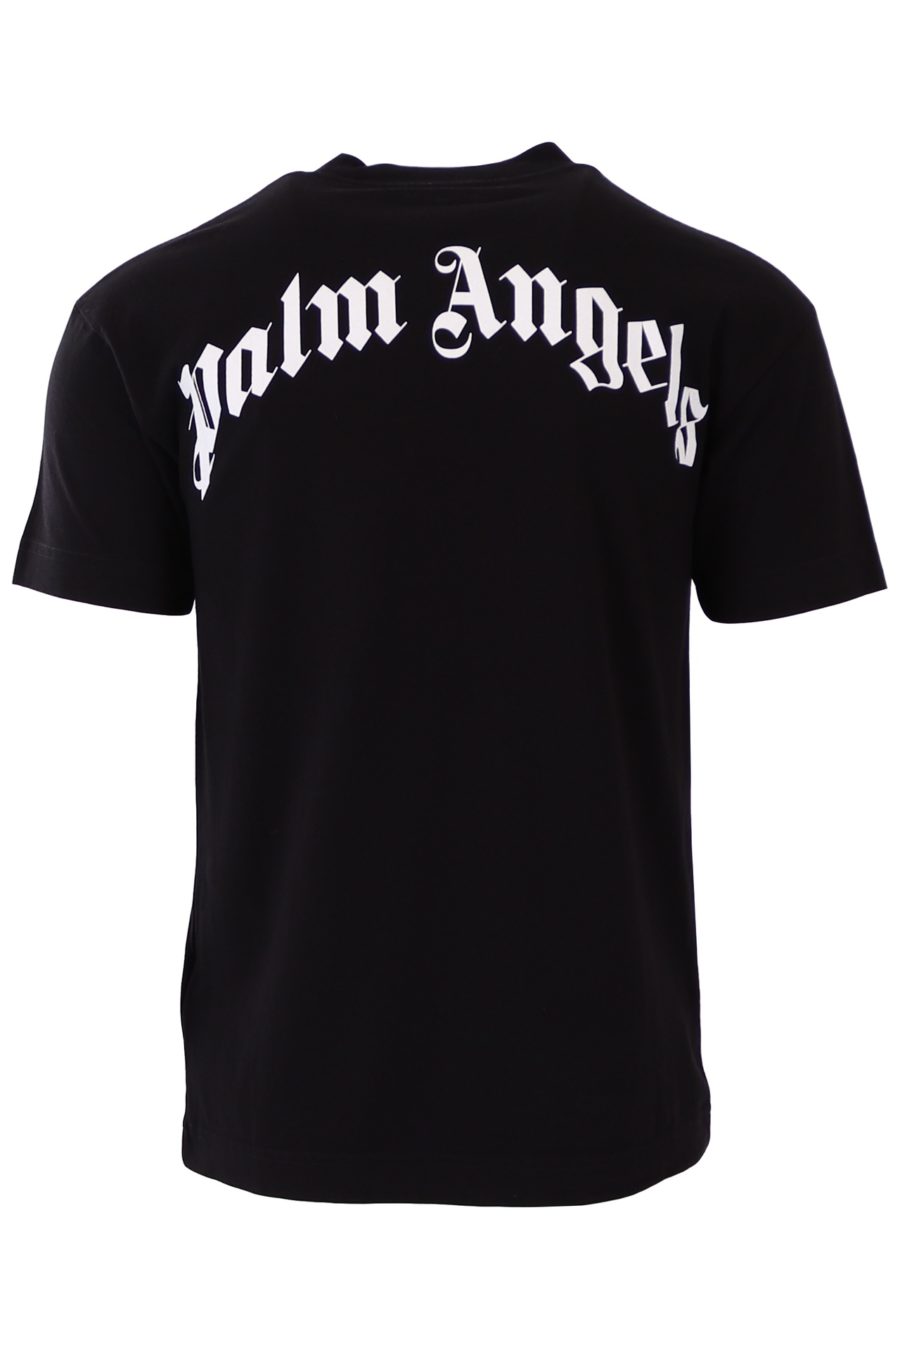 Camiseta Pushin Since 2015 by Palm Angels - LUXE BR